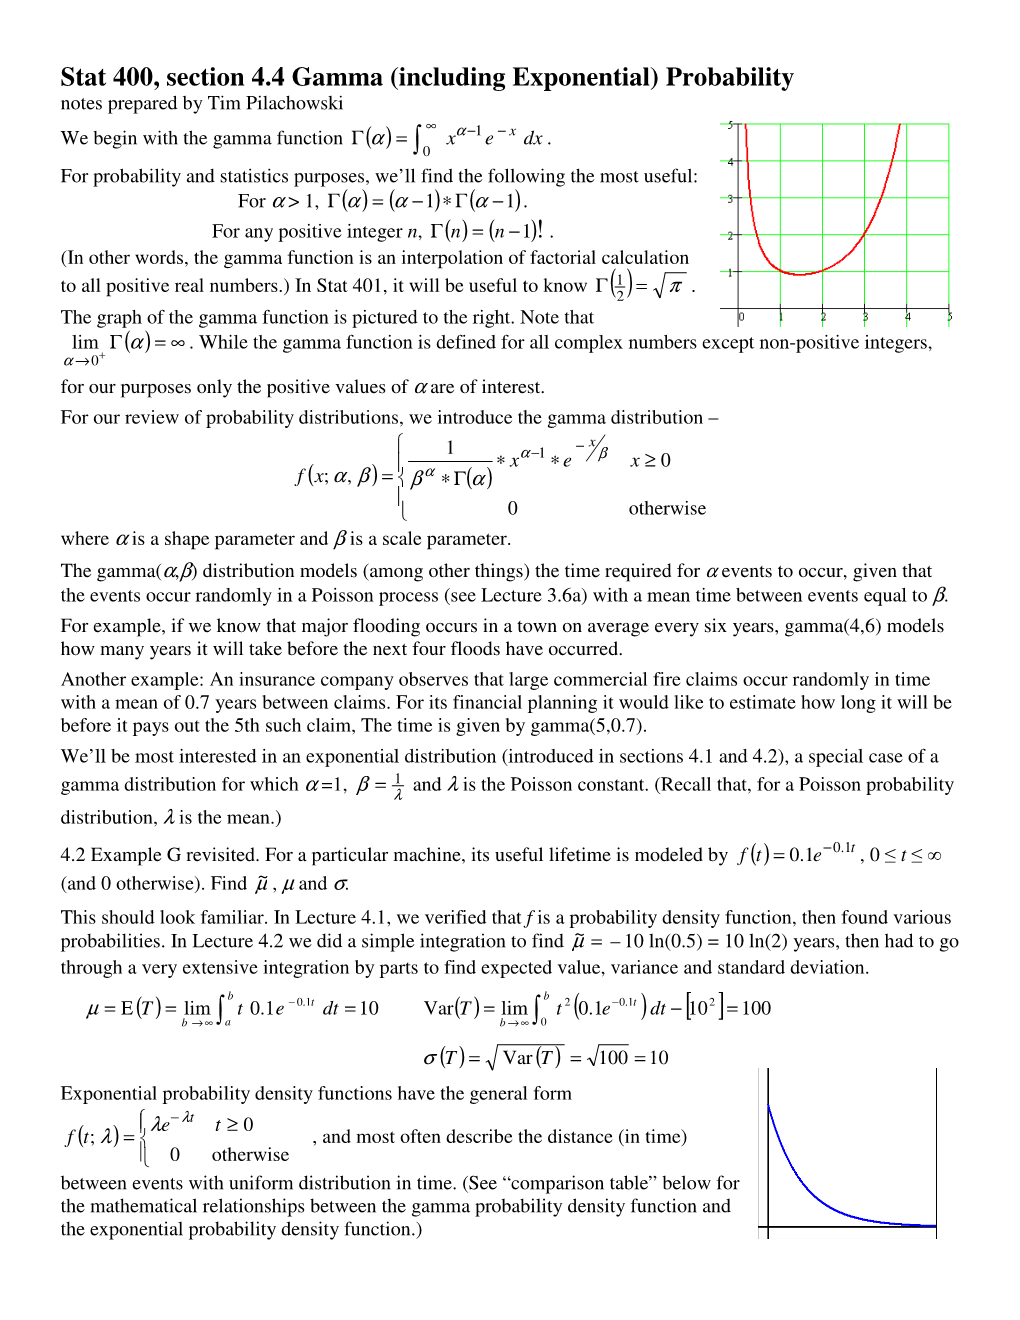 Stat 400, Section 4.4 Gamma (Including Exponential) Probability Notes Prepared by Tim Pilachowski ∞ We Begin with the Gamma Function Γ()Α = Xα −1 E − X Dx